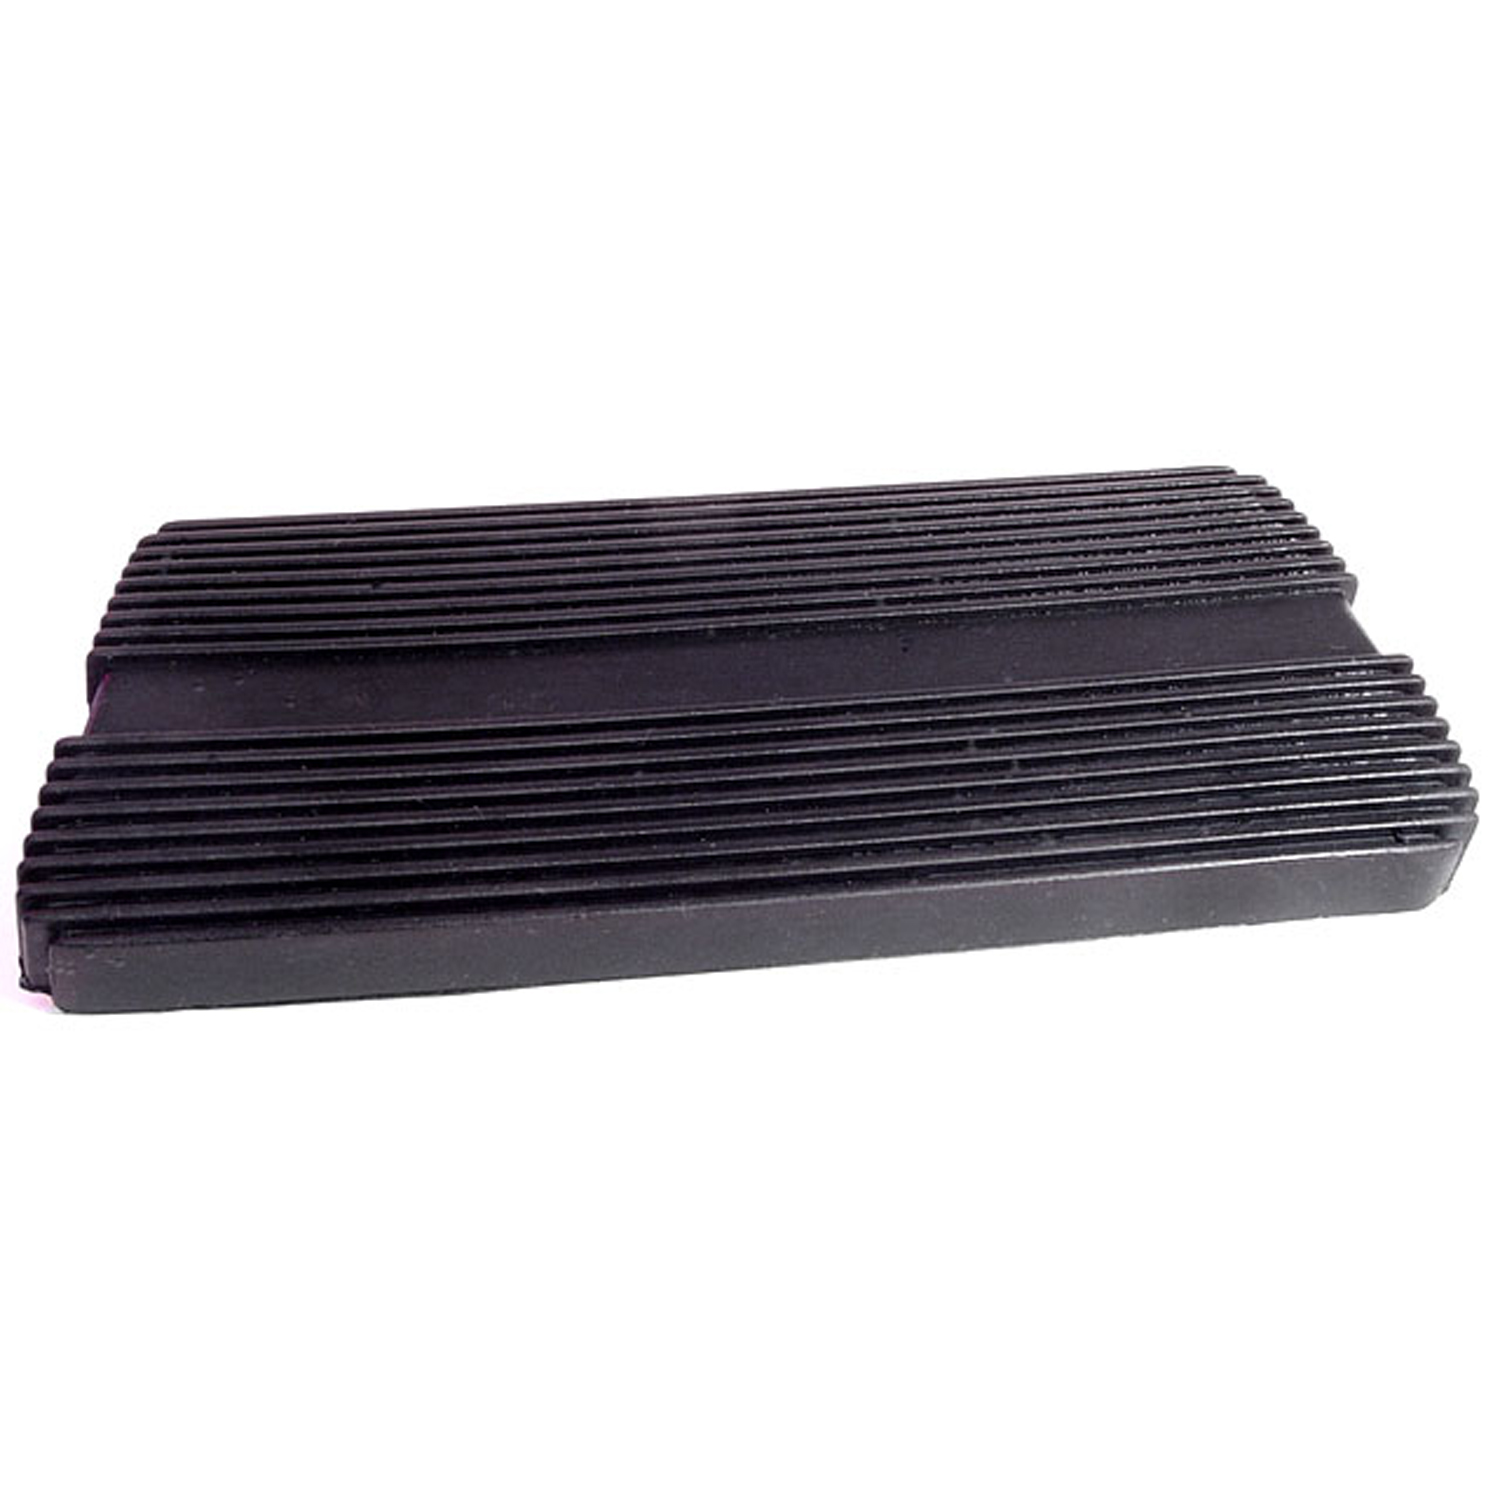 1963 Buick Riviera Power Brake Pedal Pad, Black.  Made in curved configuration-CB 83-H